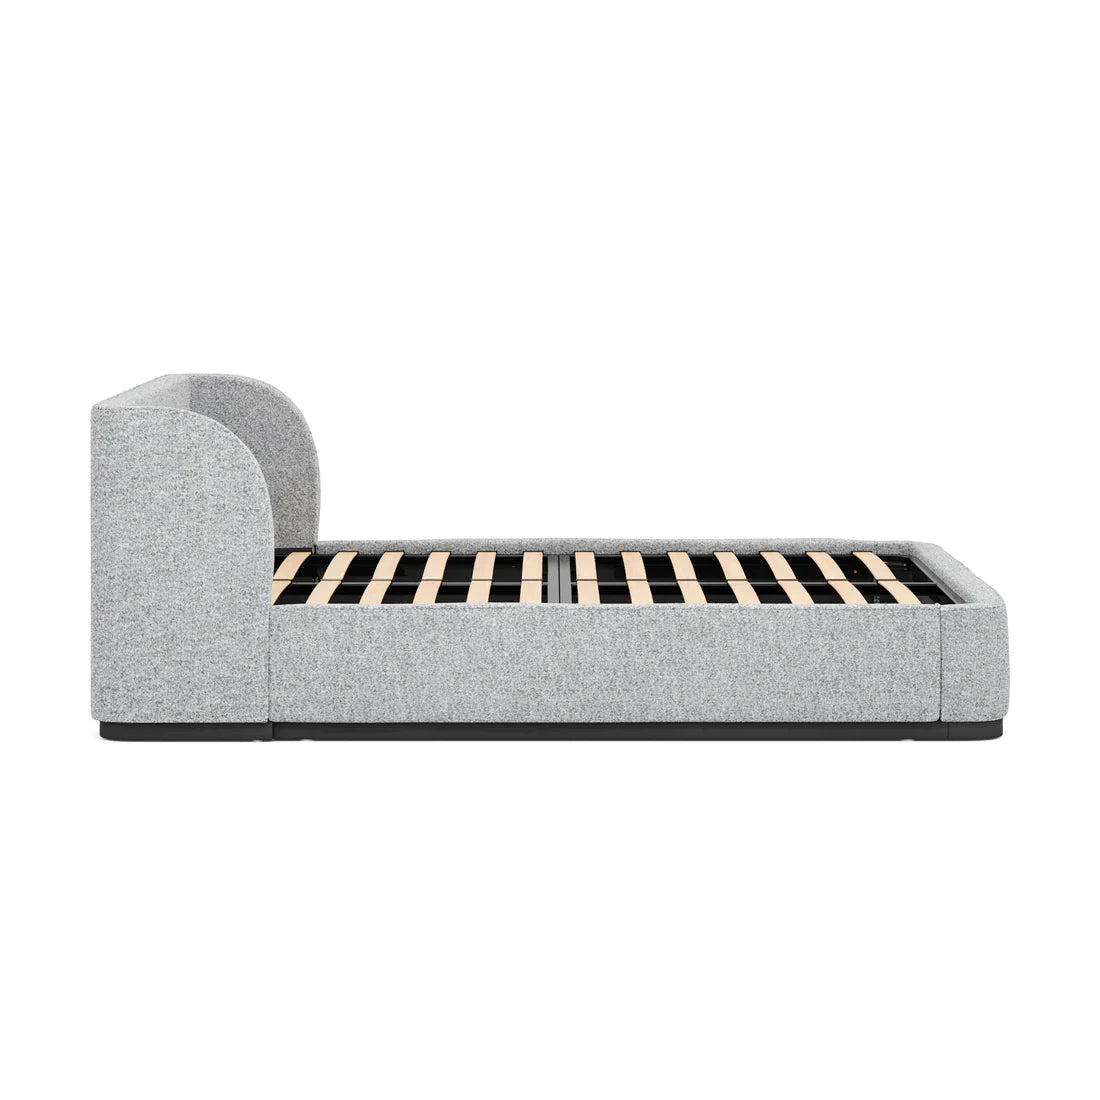 Afisi Bed Frame in Pepper Boucle - Queen - NotBrand